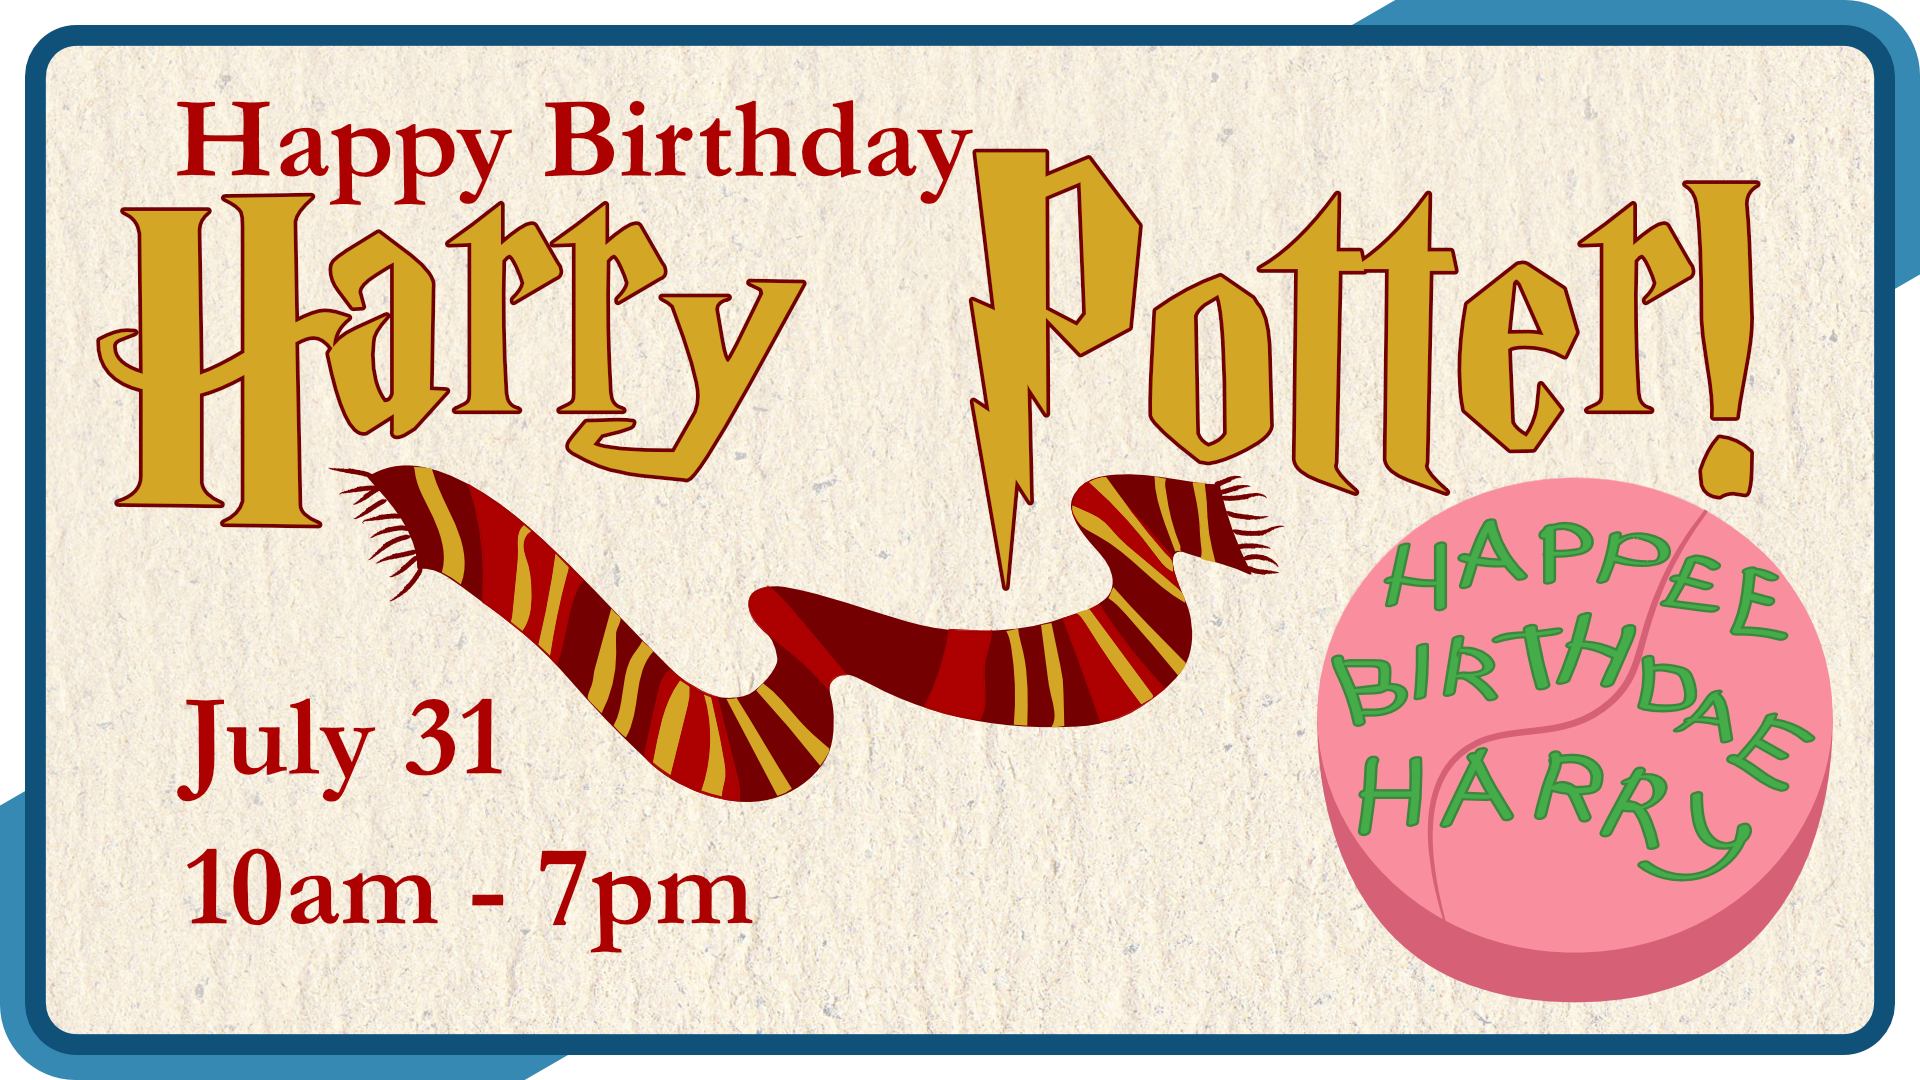 Happy Birthday Harry Potter, July 31, 10am to 7pm